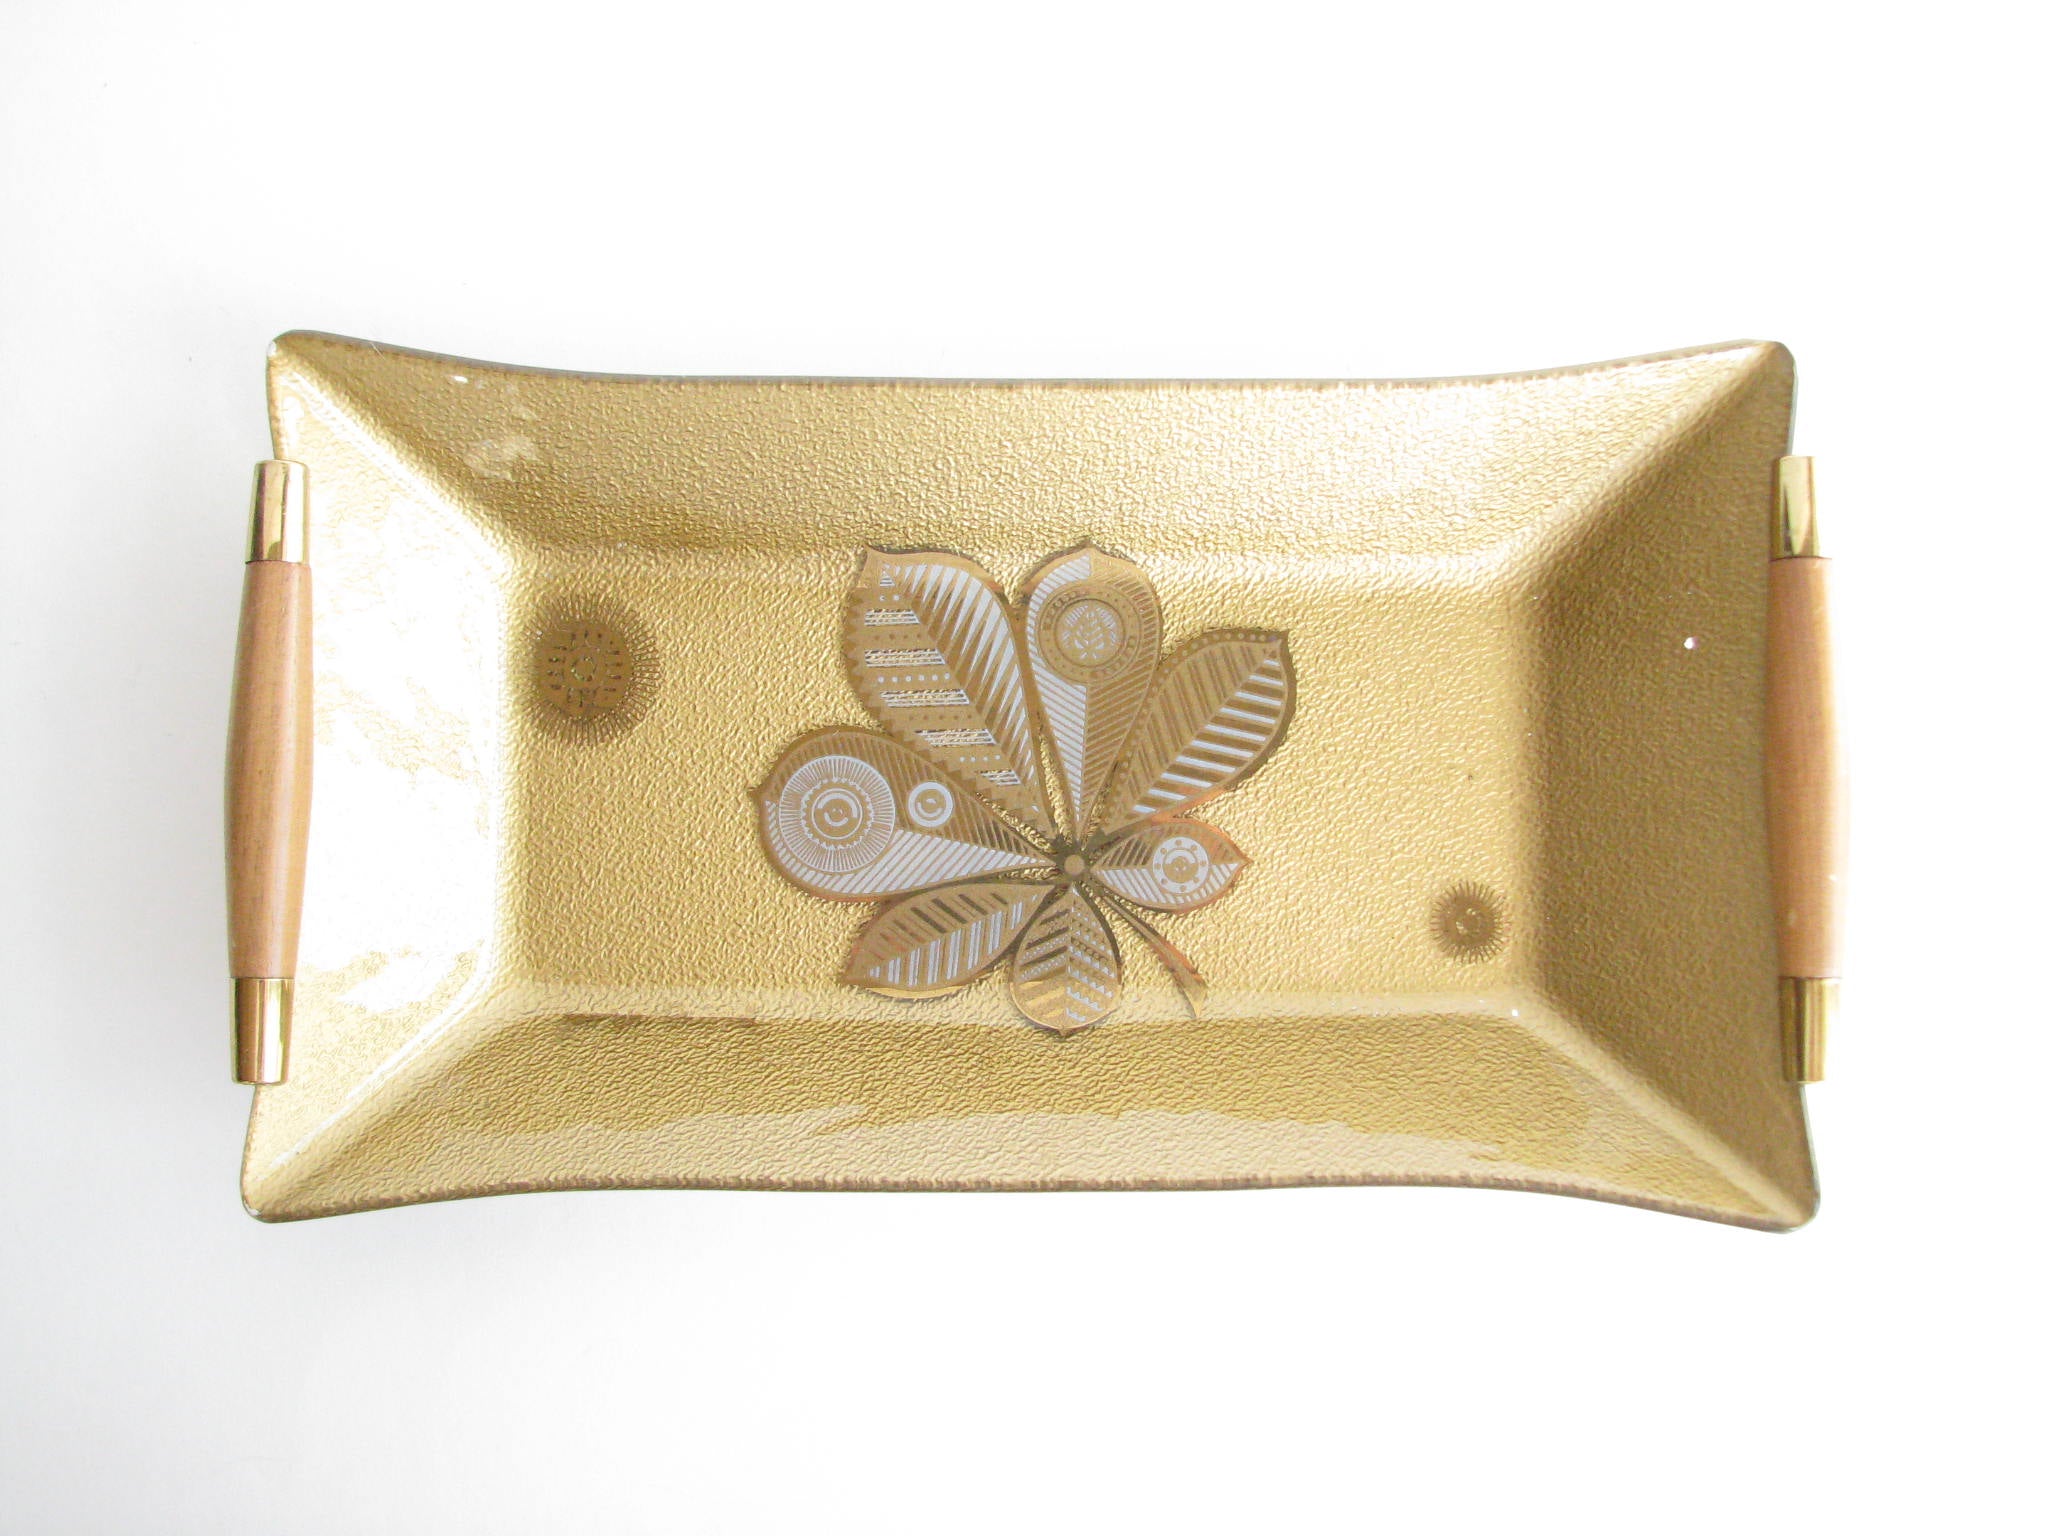 edgebrookhouse - Vintage Georges Briard Rectangular Glass Serving Tray with Gold Leaf Design and Wood Handles